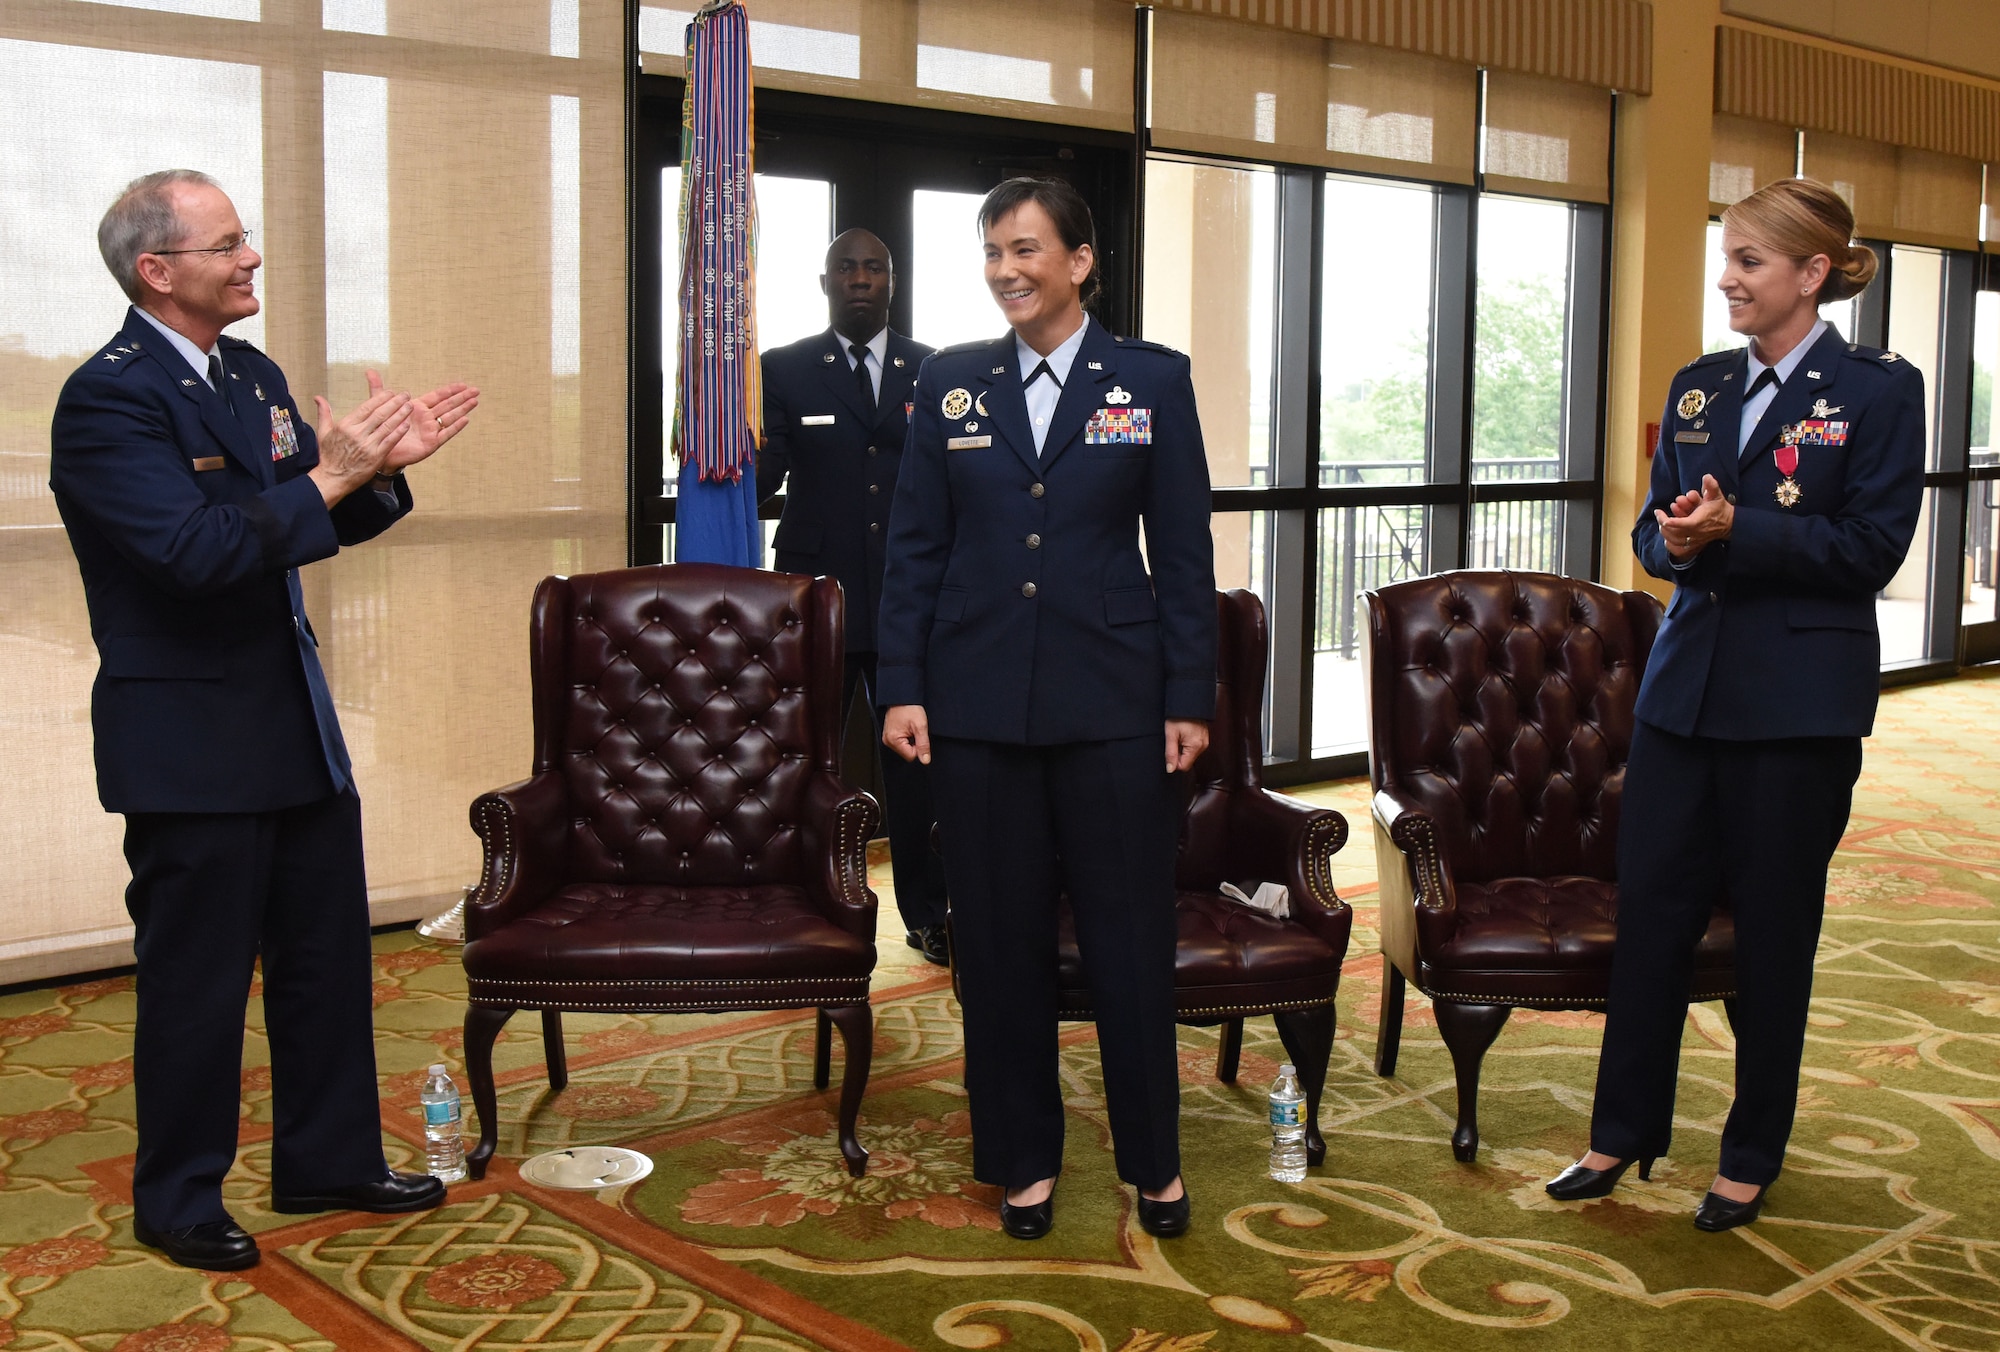 Maj. Gen. Bob LaBrutta, 2nd Air Force commander, and Col. Michele Edmondson, outgoing 81st Training Wing commander, applaud for Col. Debra Lovette, 81st TRW commander, as she assumed command during a change of command ceremony at the Bay Breeze Event Center June 2, 2017, on Keesler Air Force Base, Miss. The ceremony is a symbol of command being exchanged from one commander to the next by the handing-off of a ceremonial guidon. (U.S. Air Force photo by Kemberly Groue)